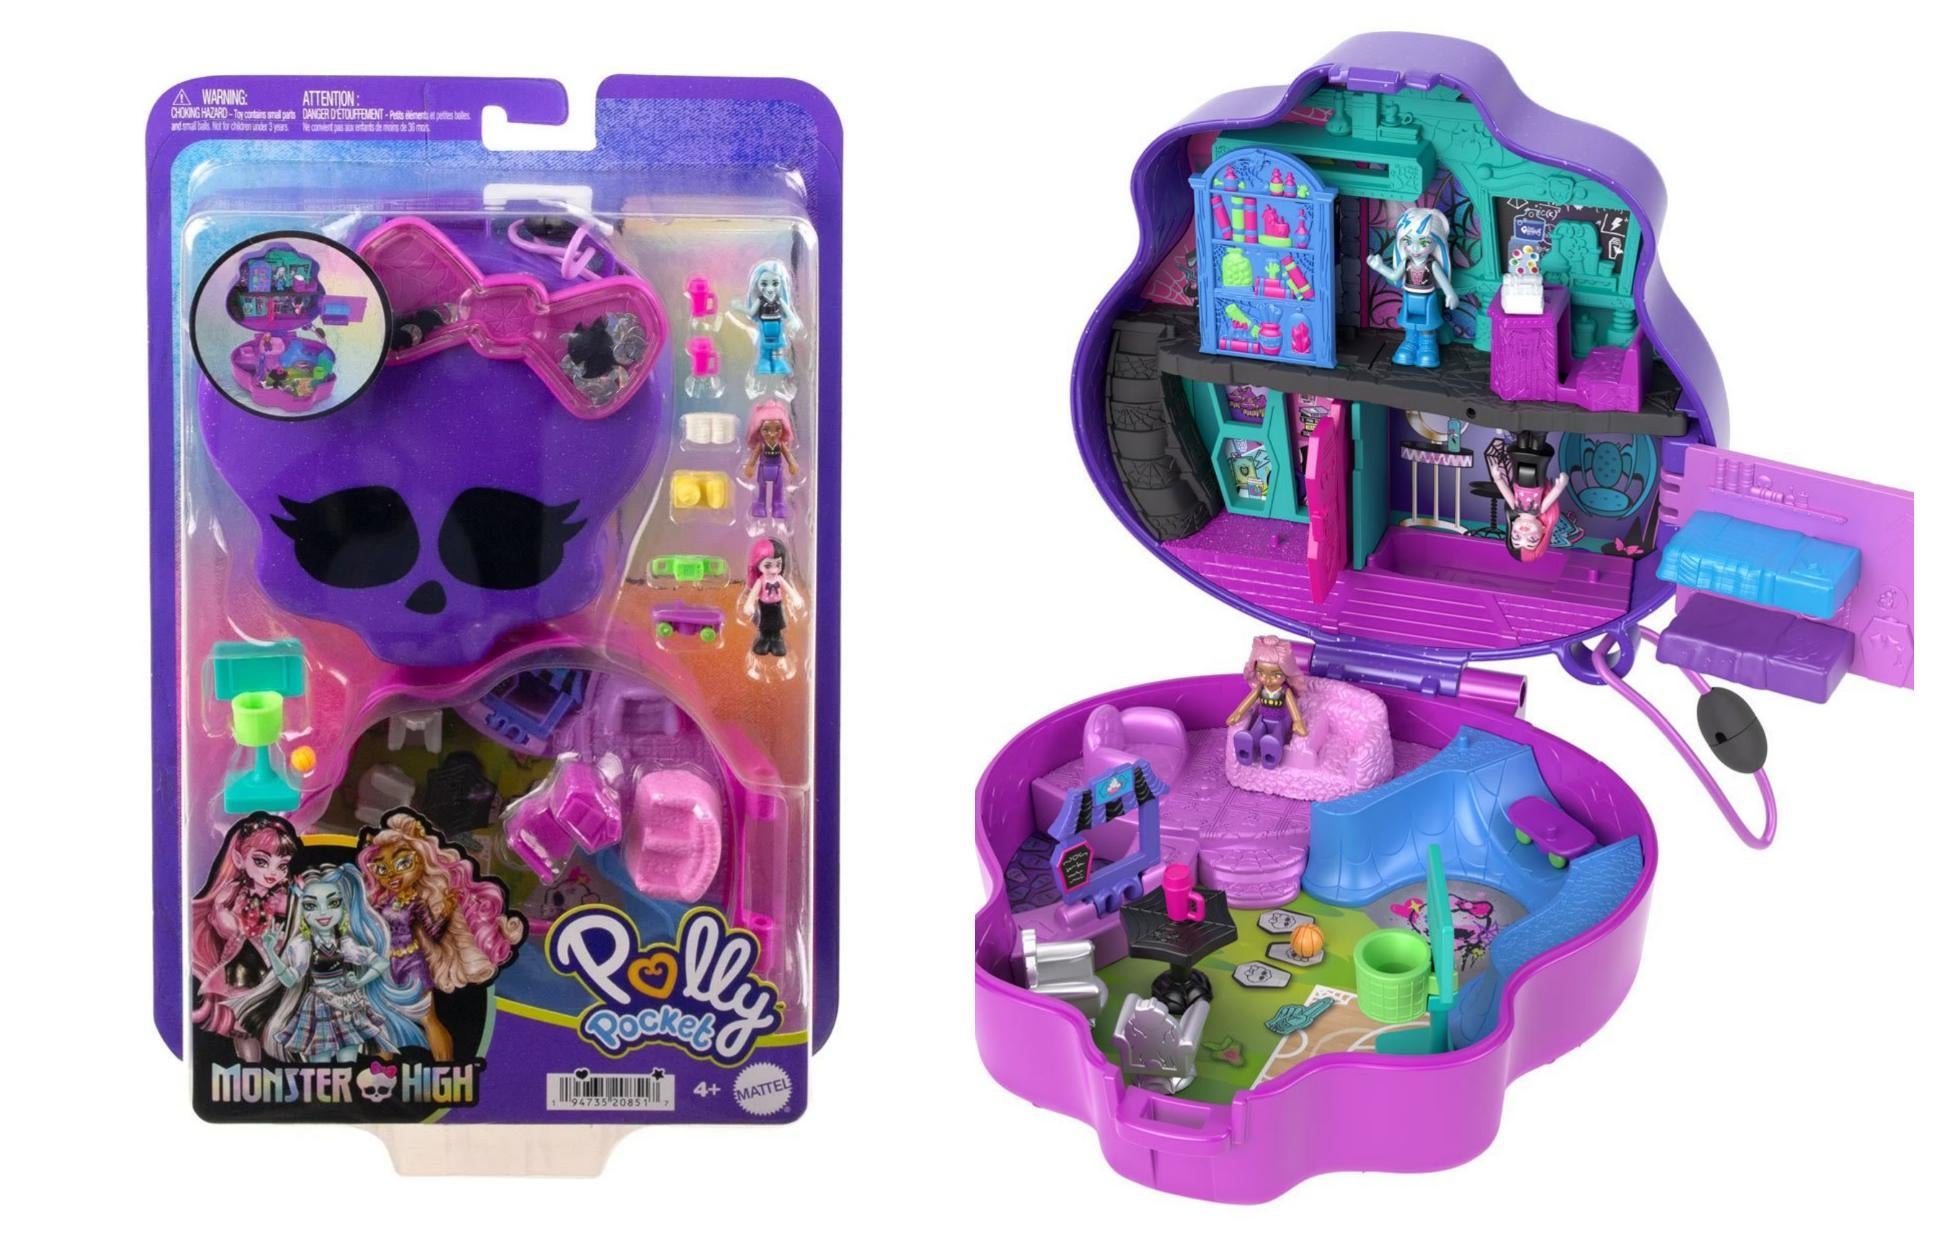 Polly Pocket Friends TV-Series Collector Playset